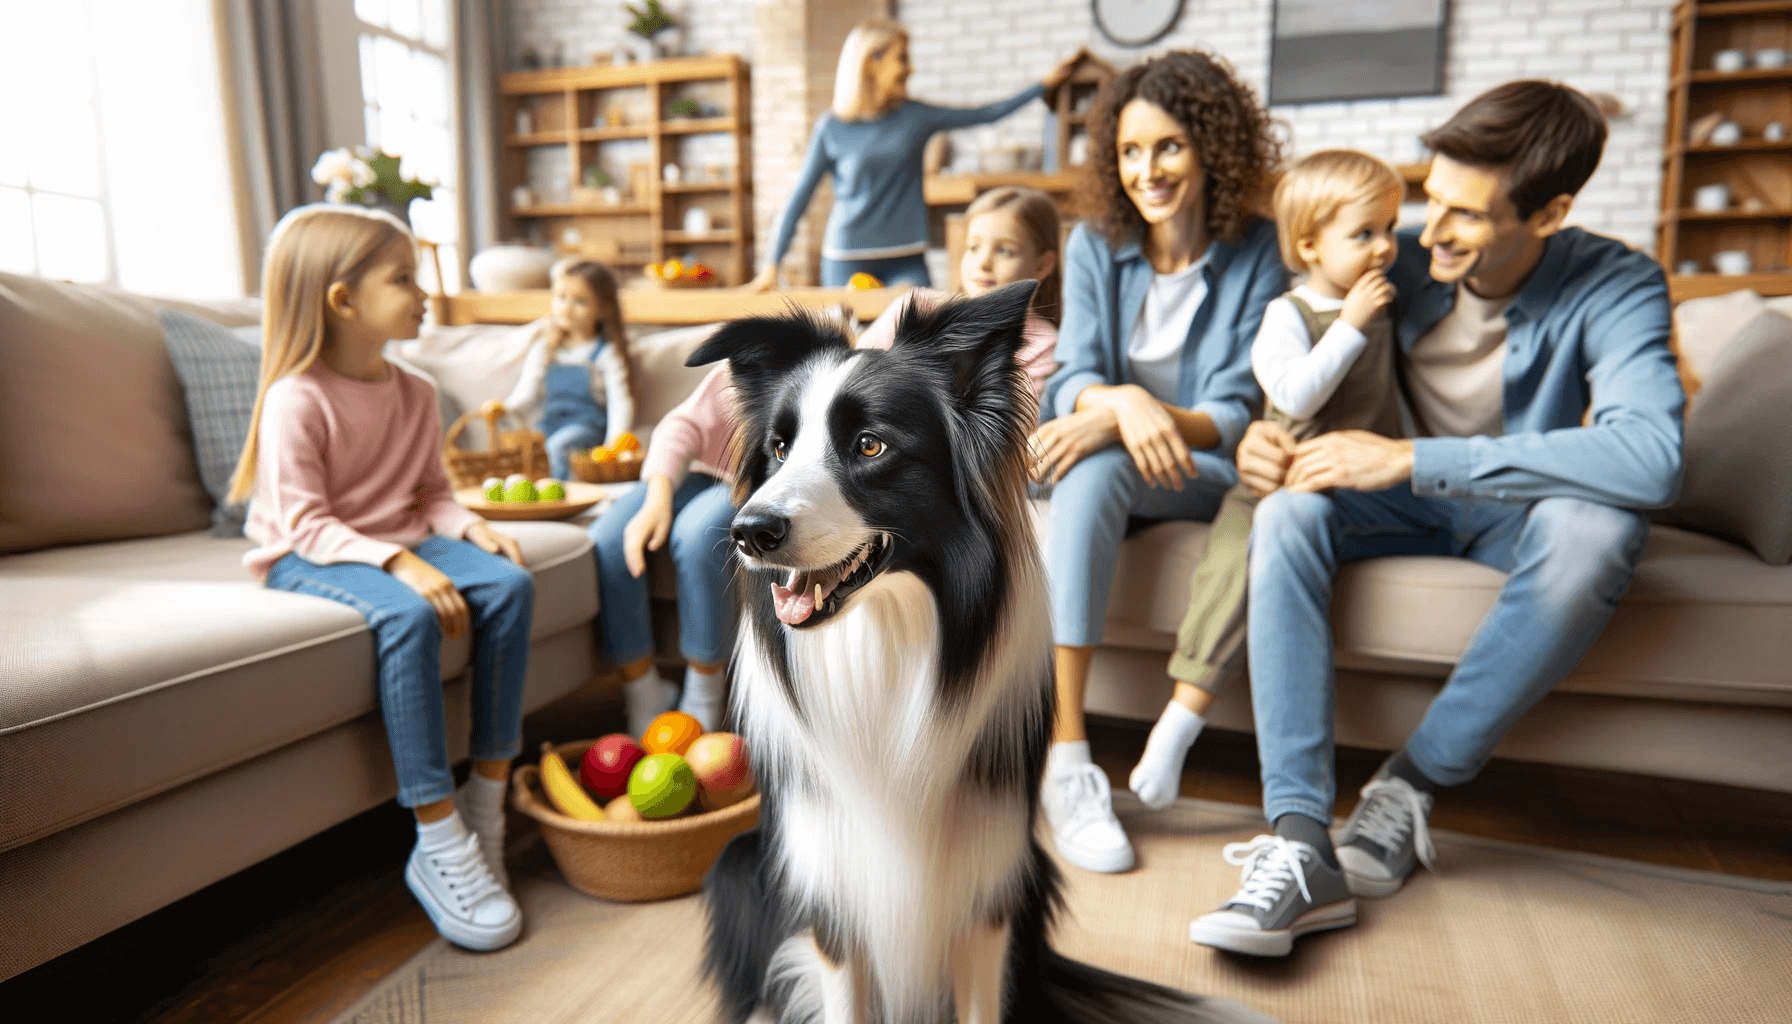 Smooth Coat Border Collie in a family setting, surrounded by children and adults in a home environment.